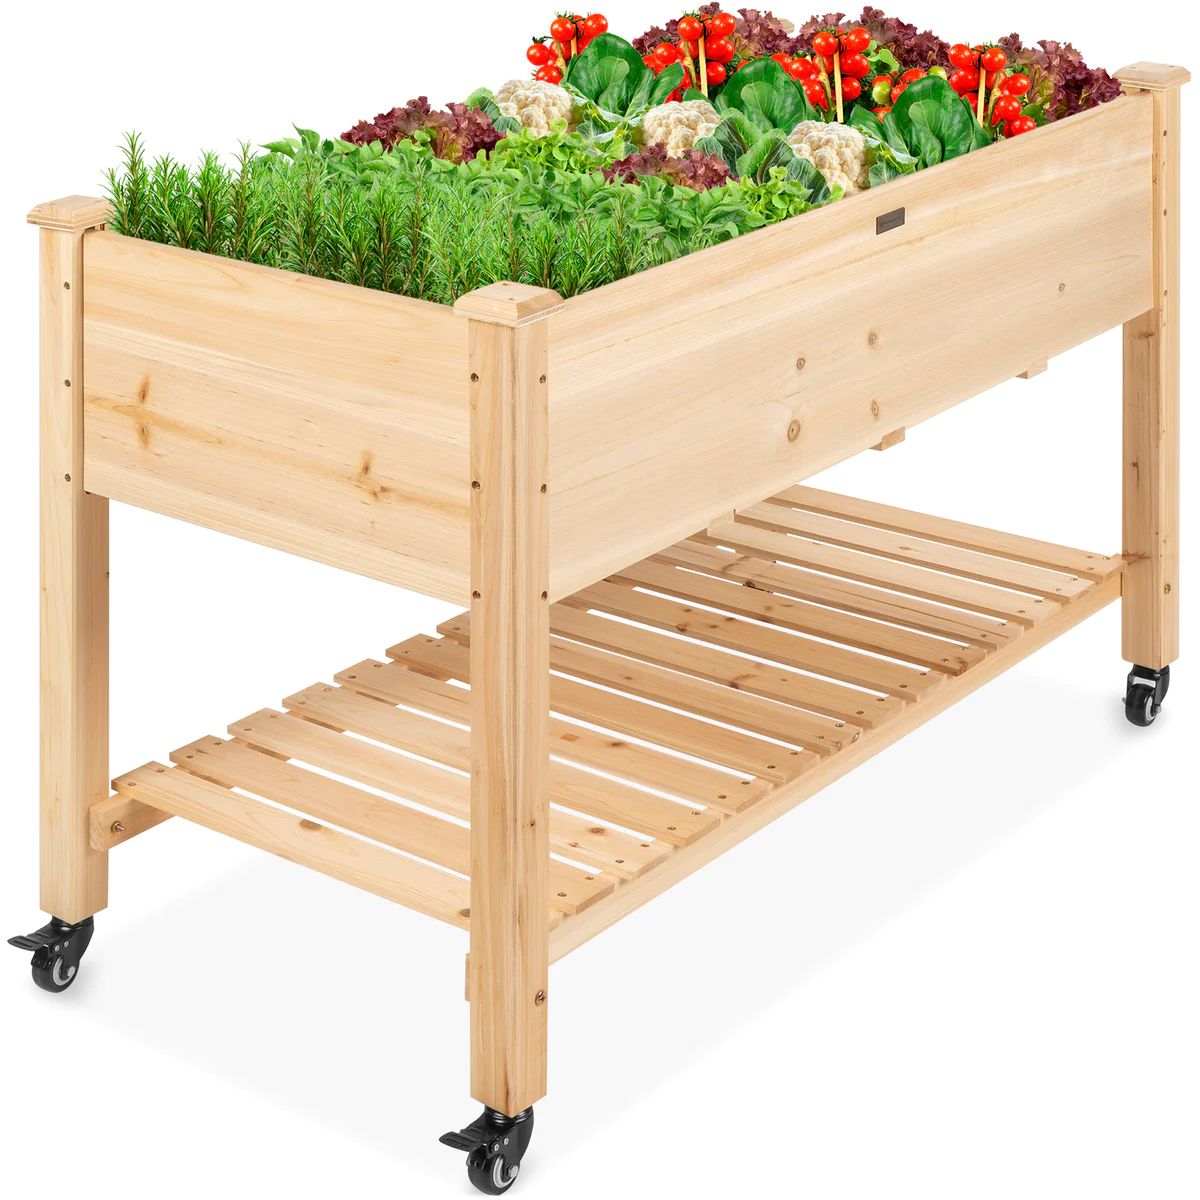 Mobile Raised Garden Bed Elevated Wood Planter w/ Wheels, Storage Shelf | Best Choice Products 